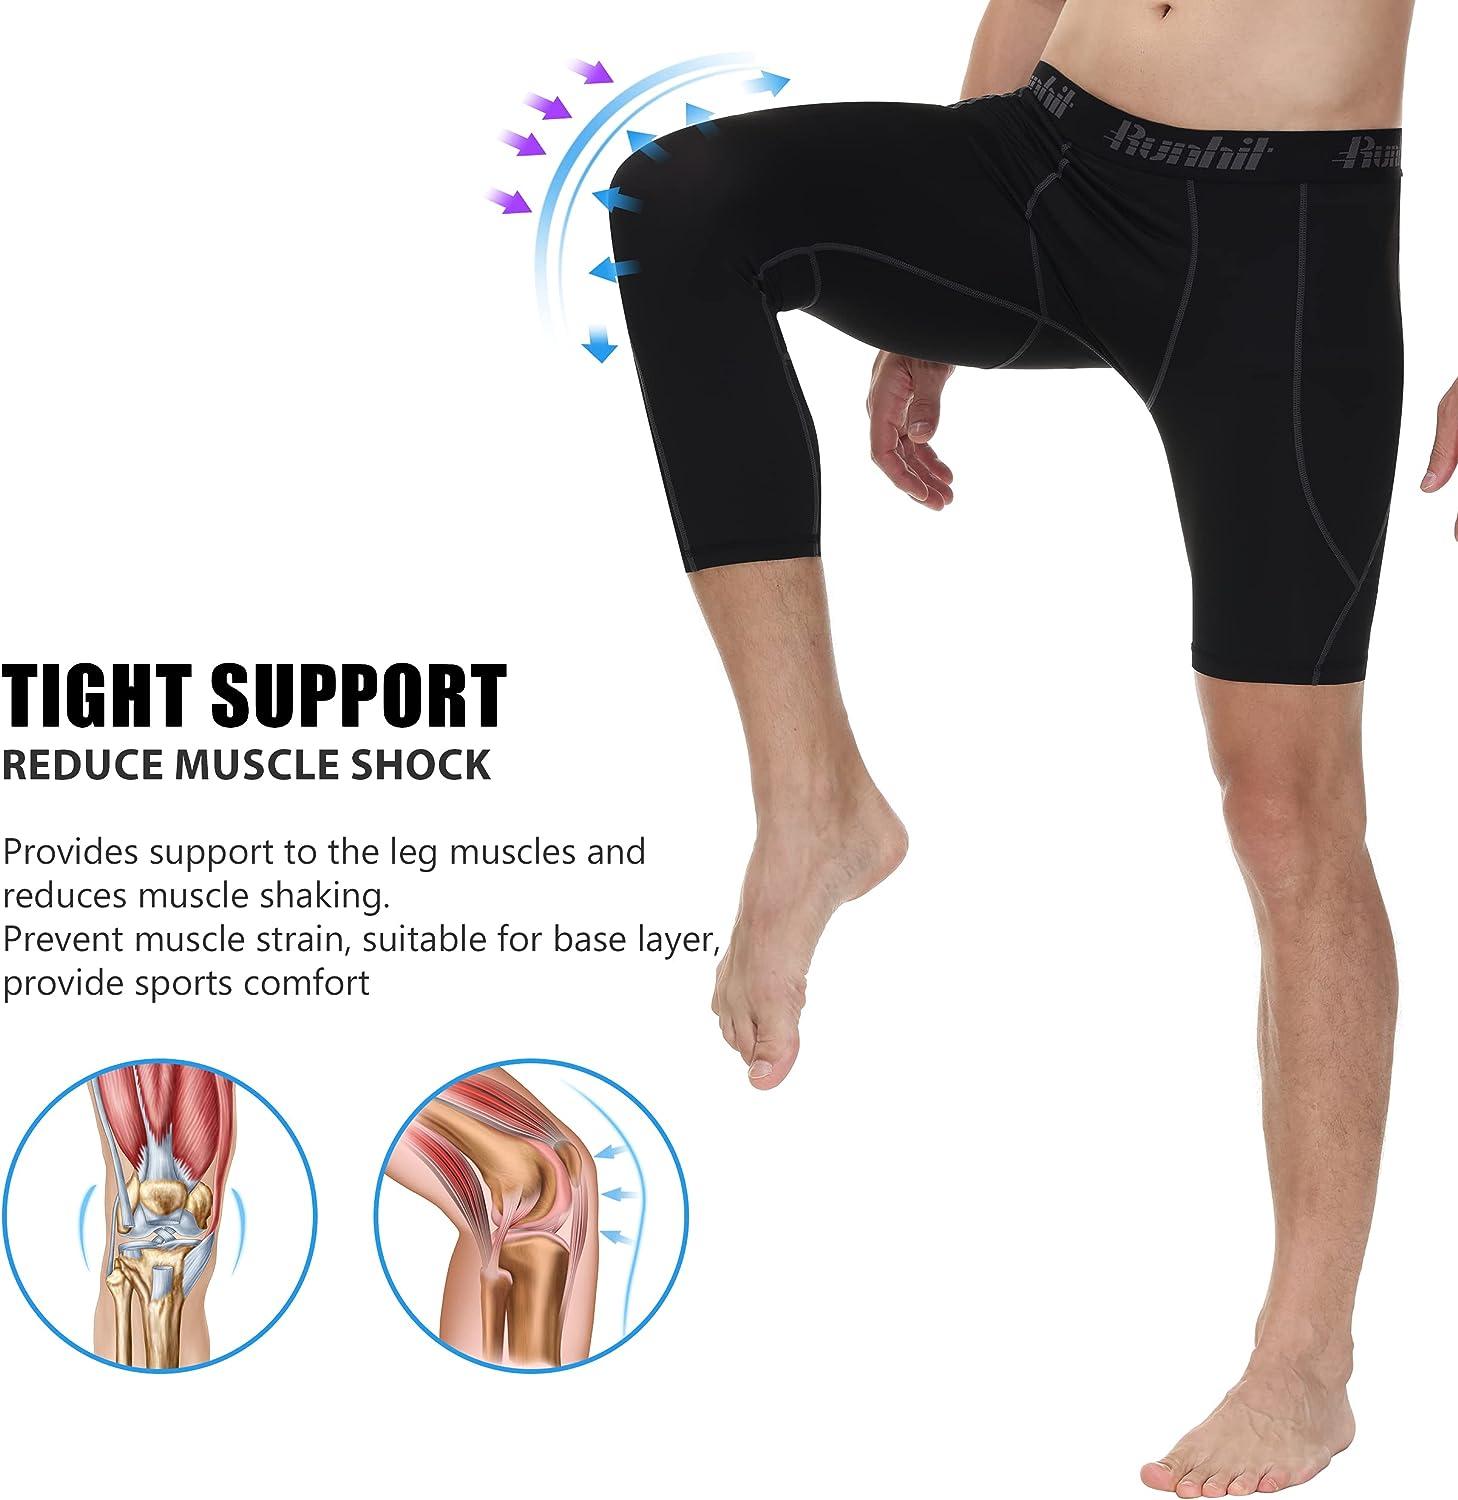 How to put on compression leggings?